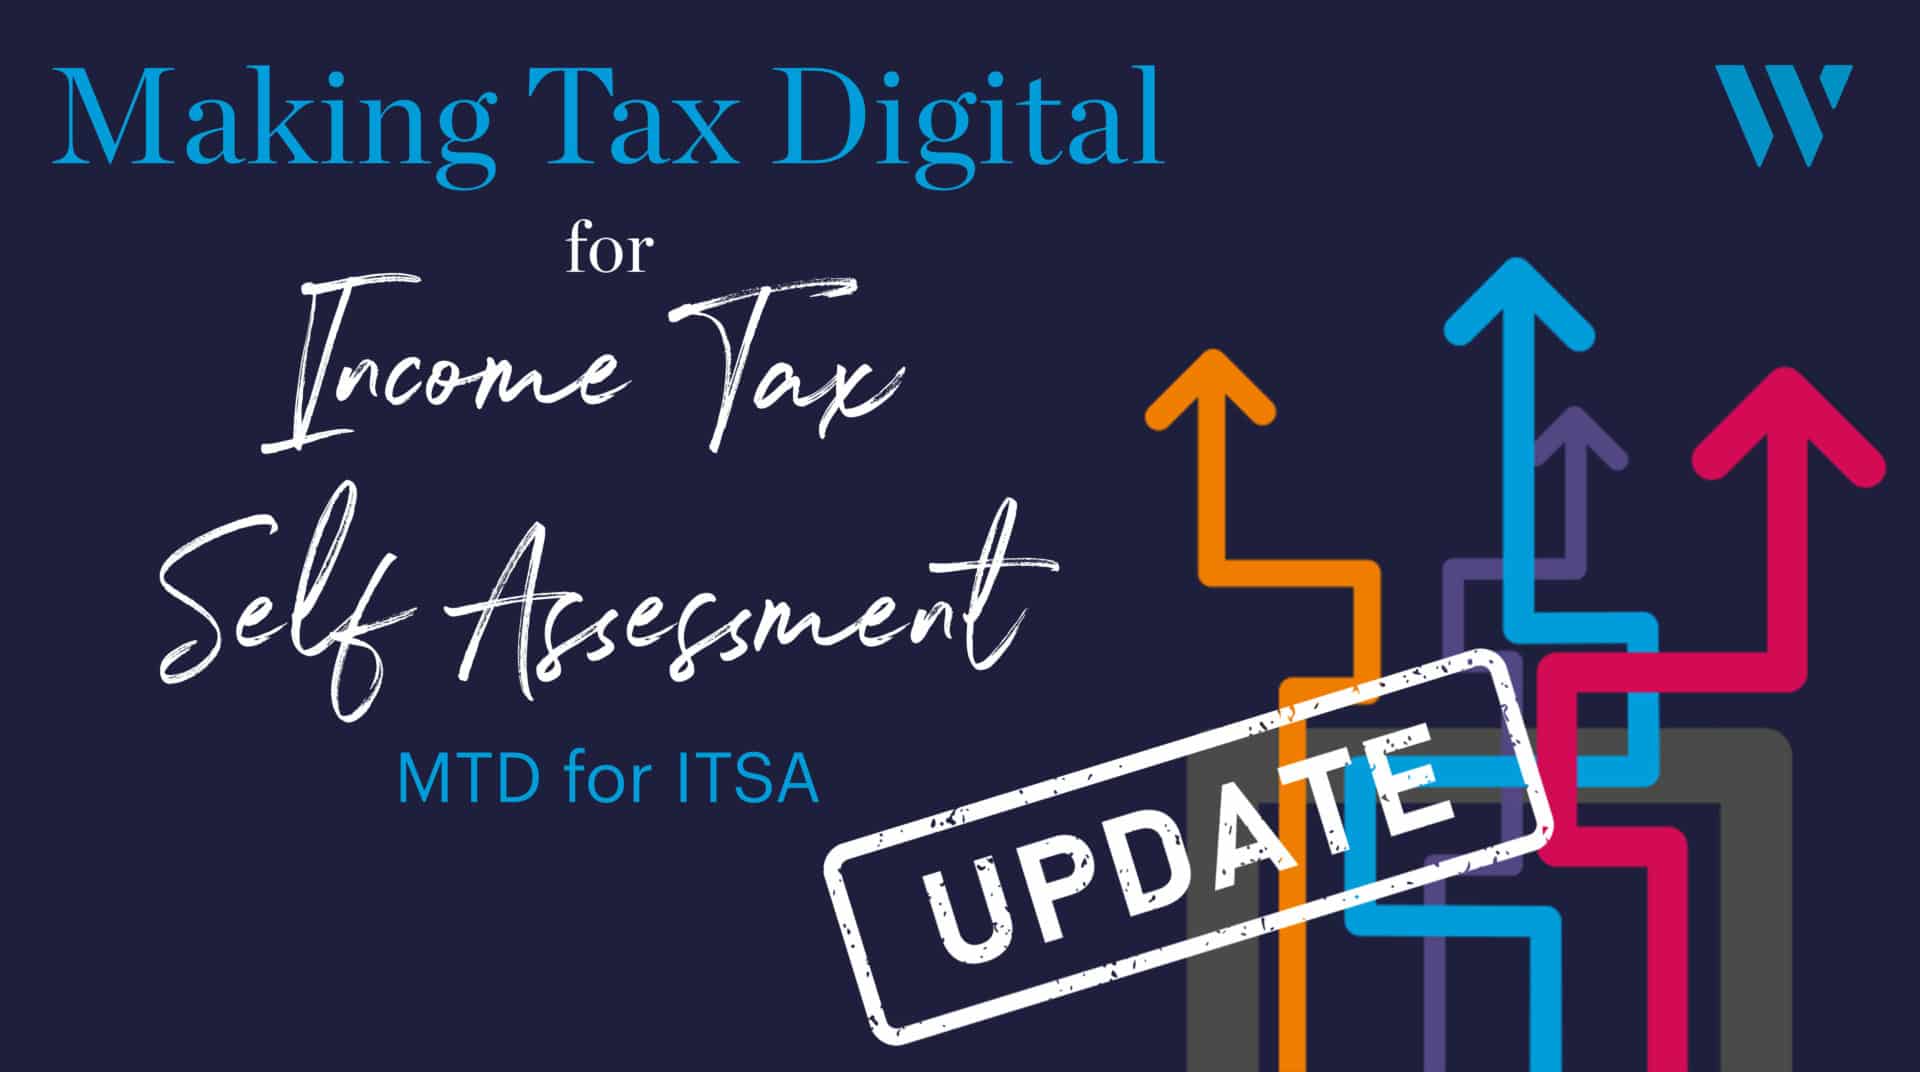 Making Tax Digital for Income Tax Self Assessment